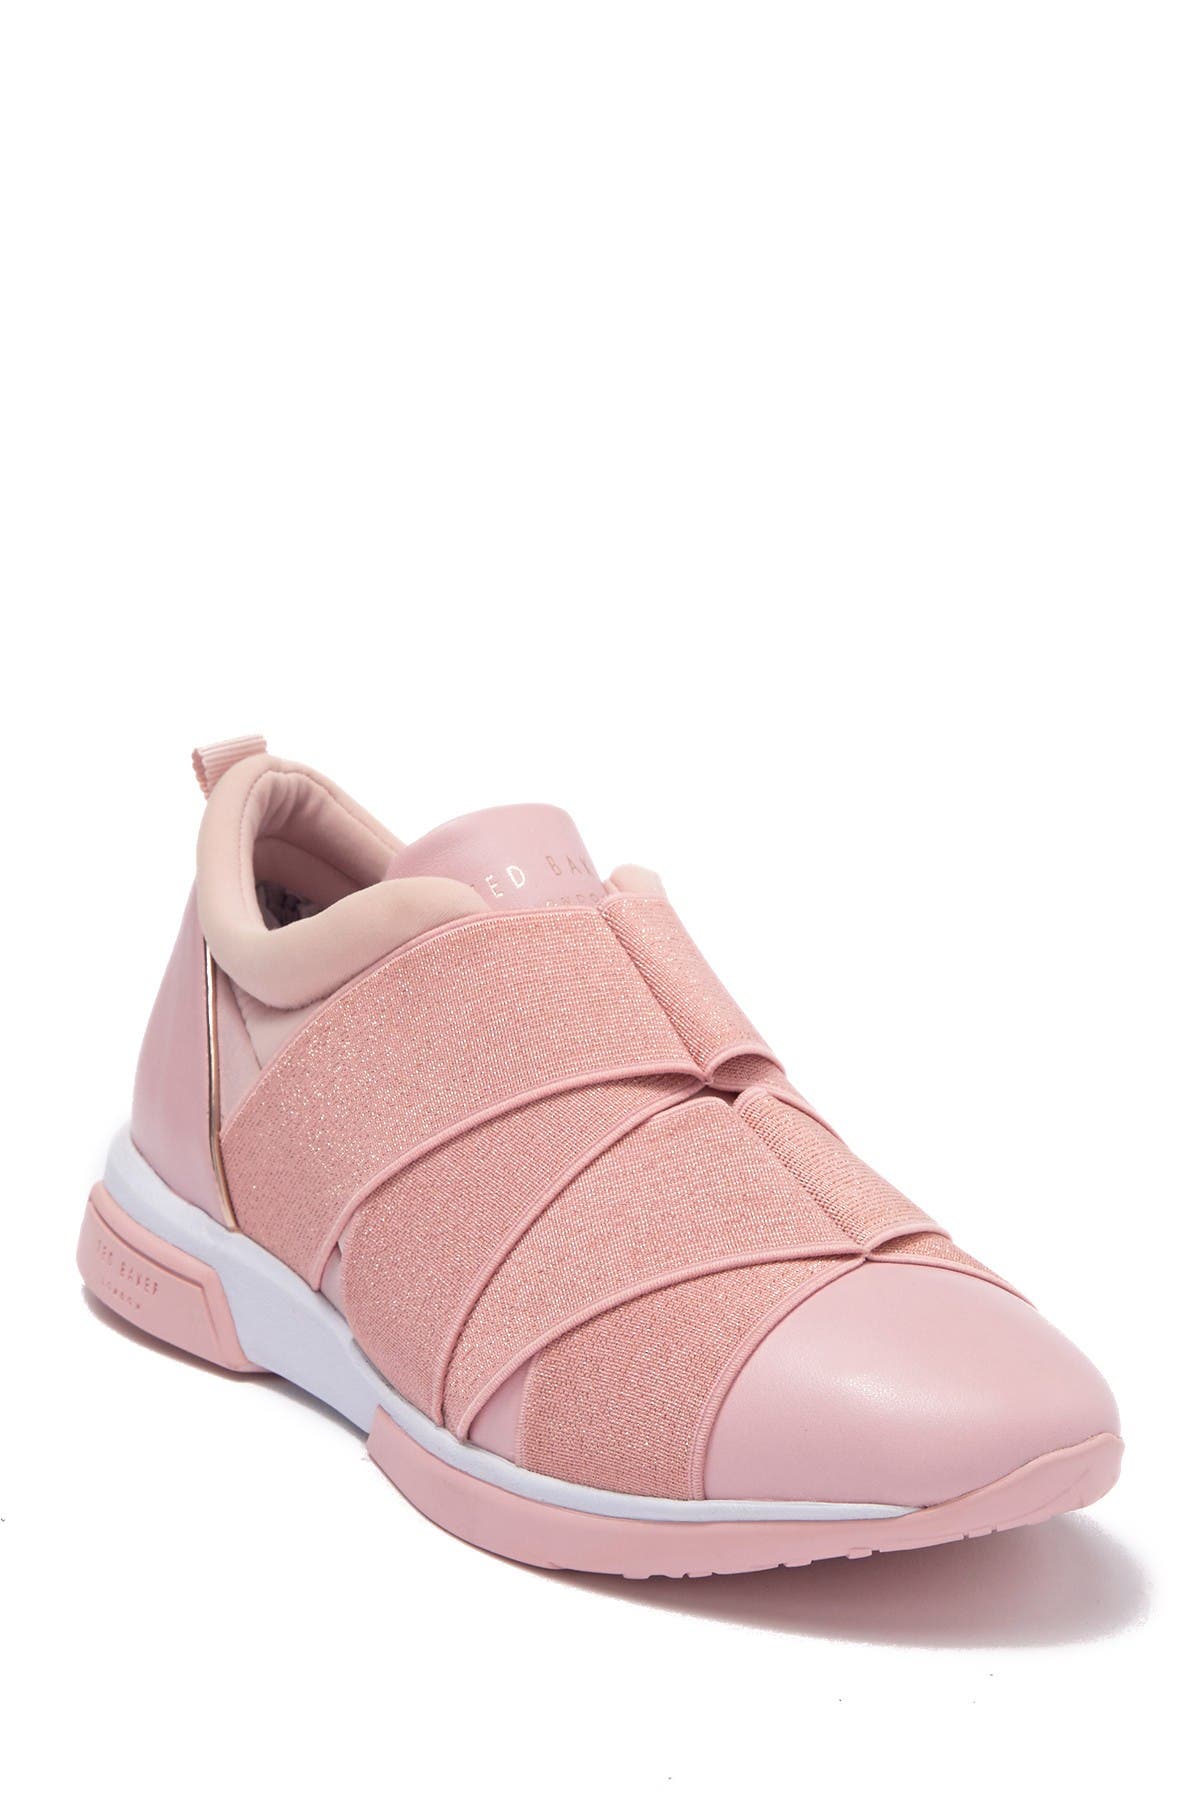 queane ted baker trainers